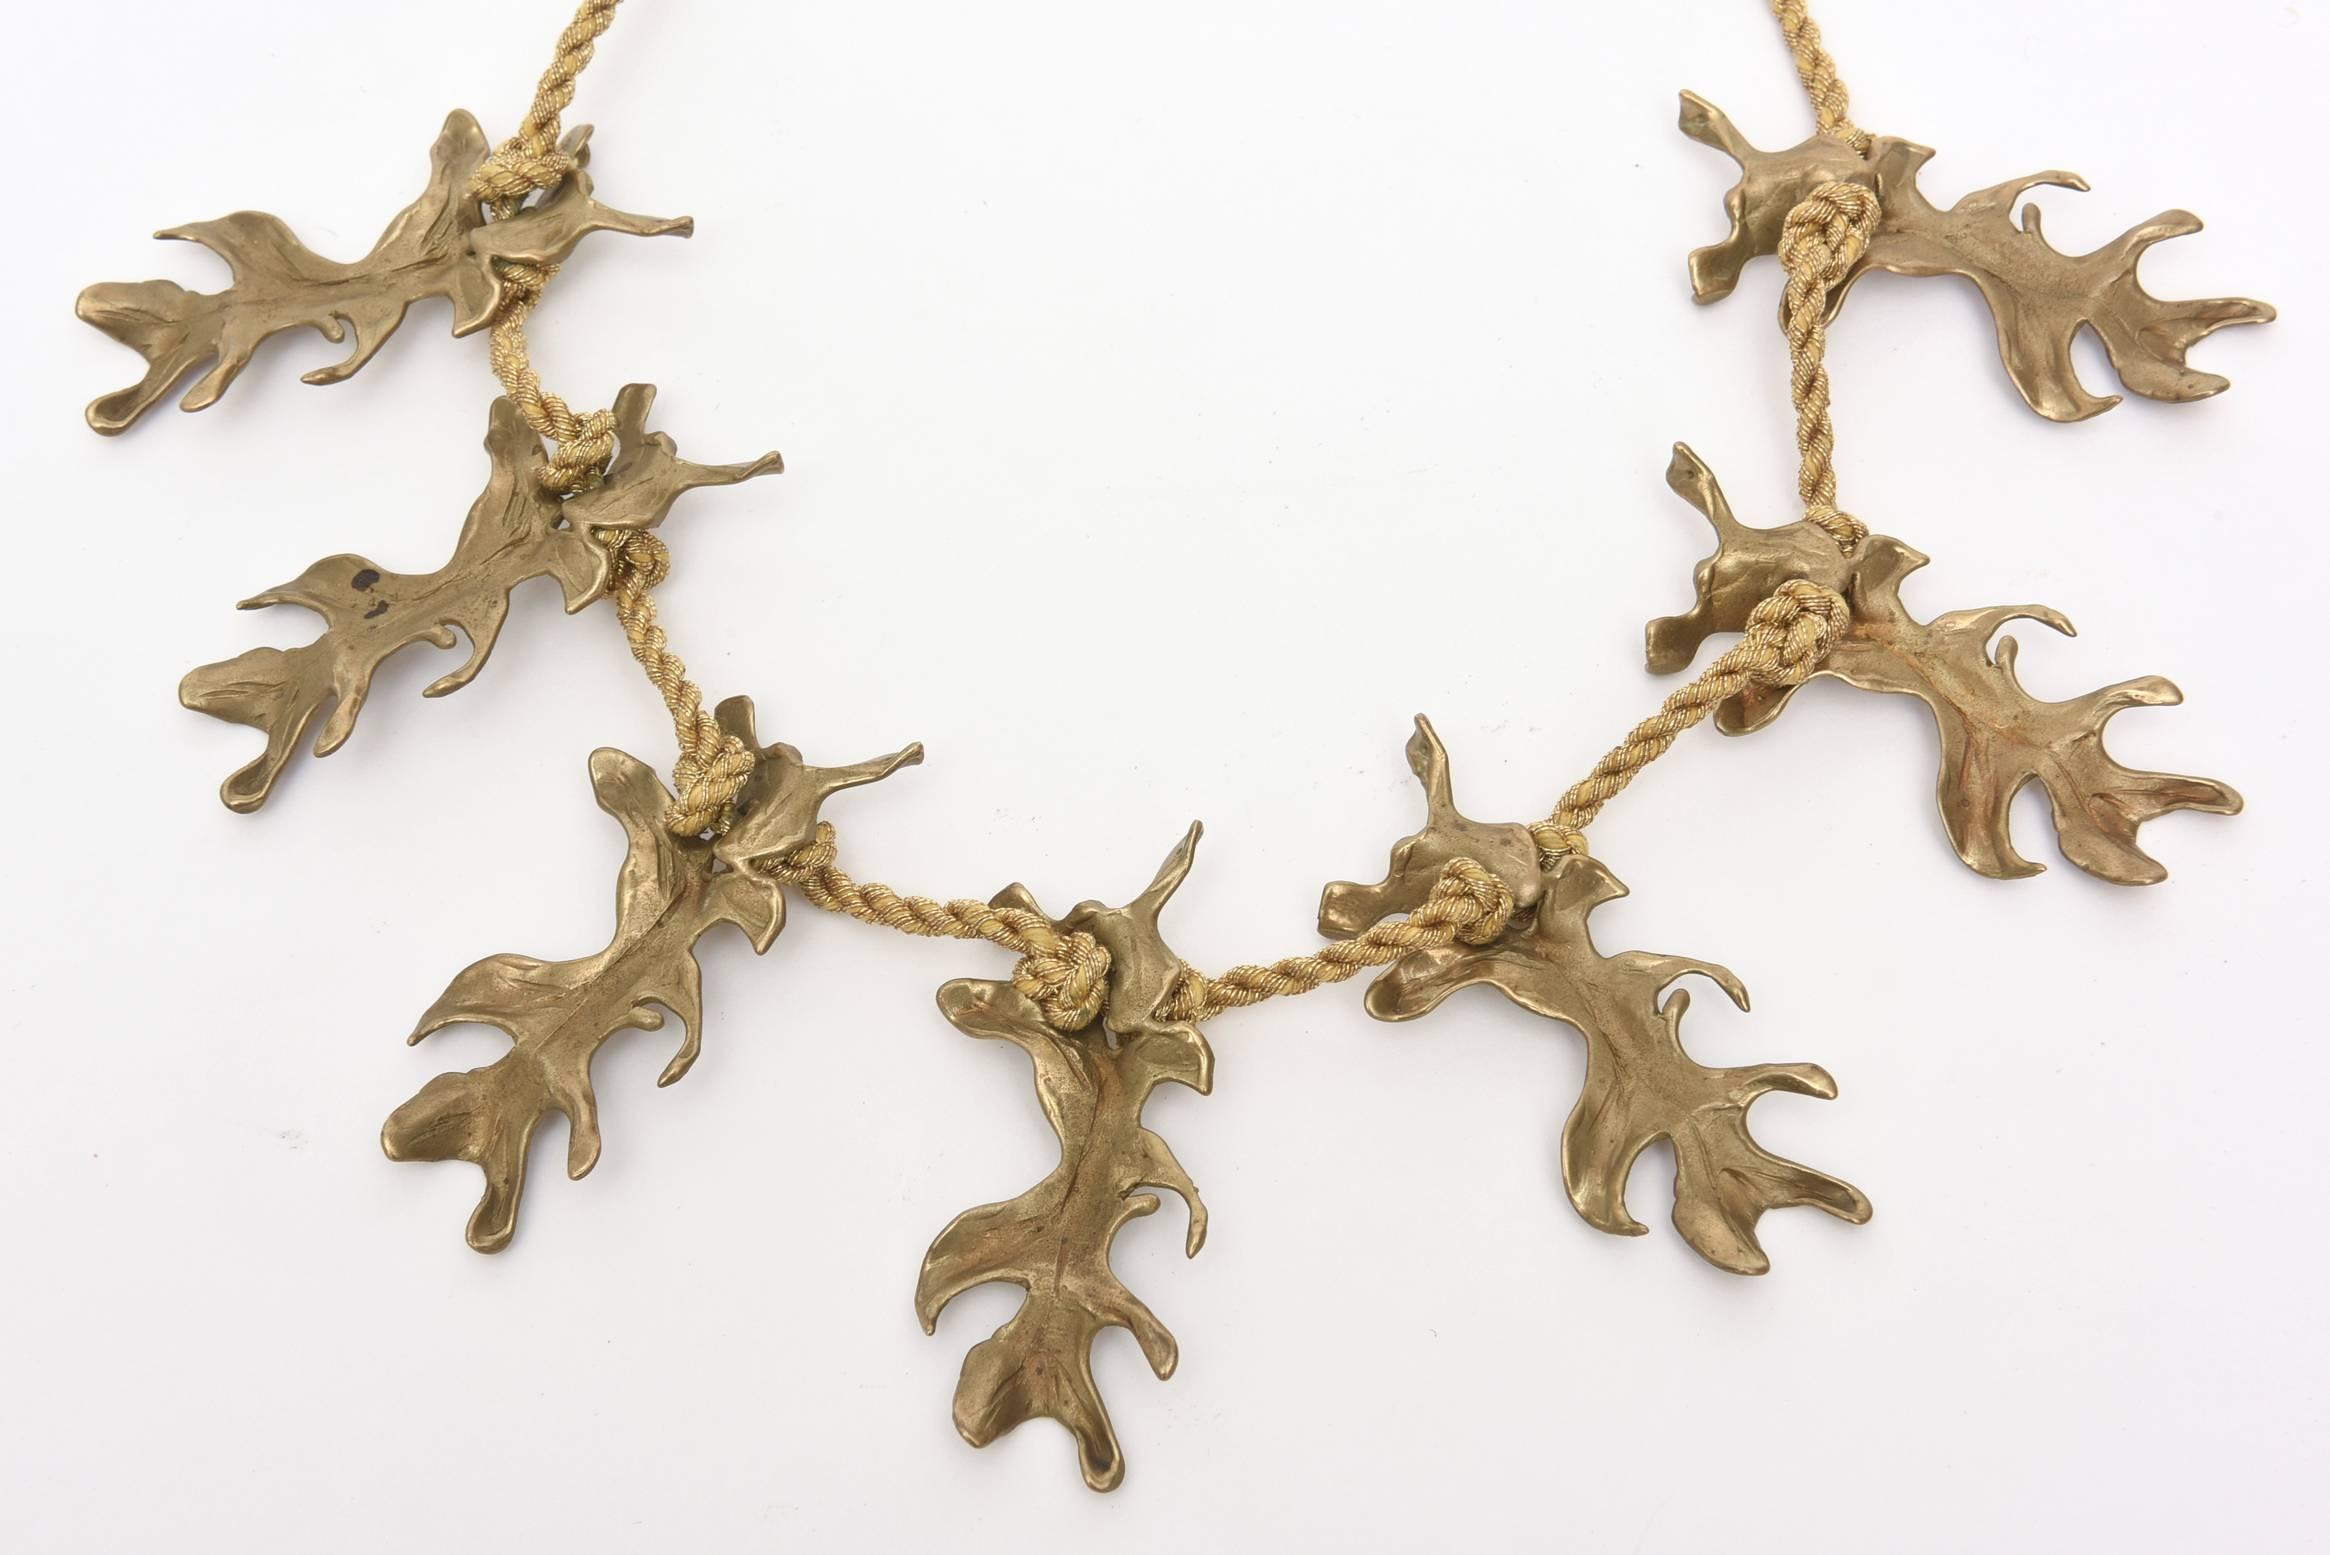 This vintage necklace by Mary McFadden has beautiful gold silk metallic braided rope that houses the 6 bronze pendants that hang from it. It simply ties around the neck so one can make it fit as low or high as possible.The leaf shaped bronze